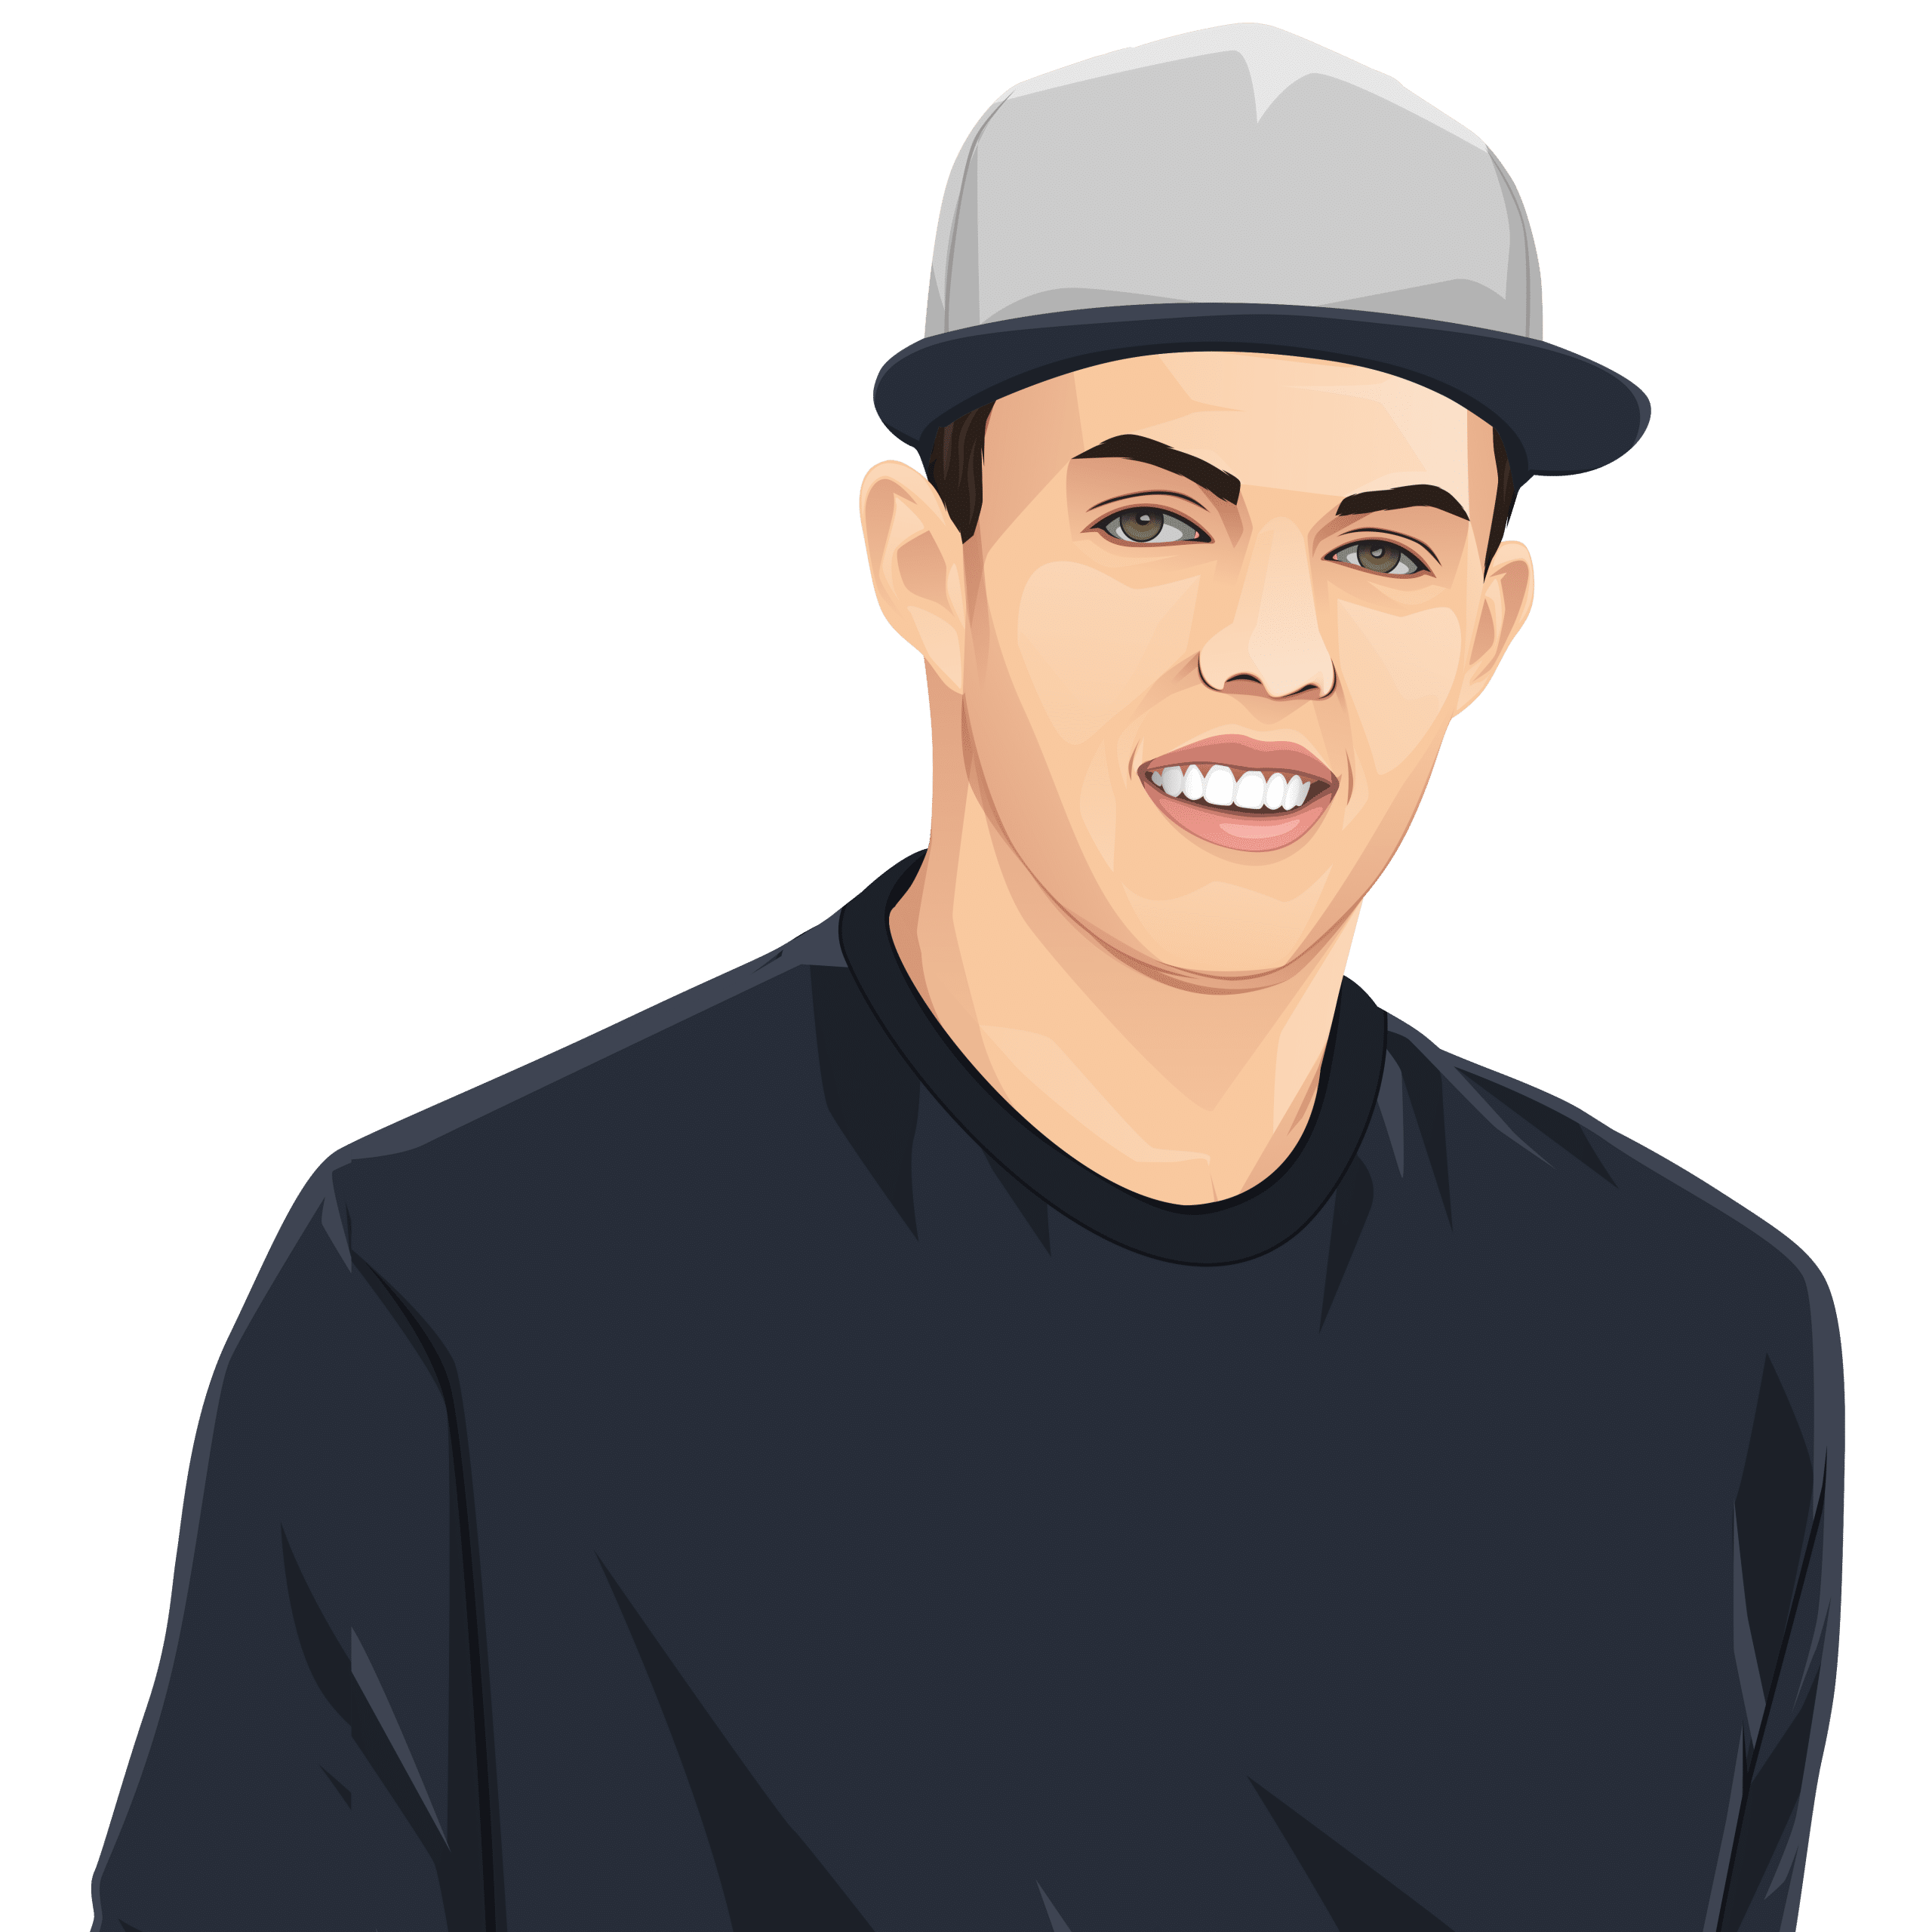 Cartoon rendition of a man smiling. He has a black shirt and a gray hat with black brim